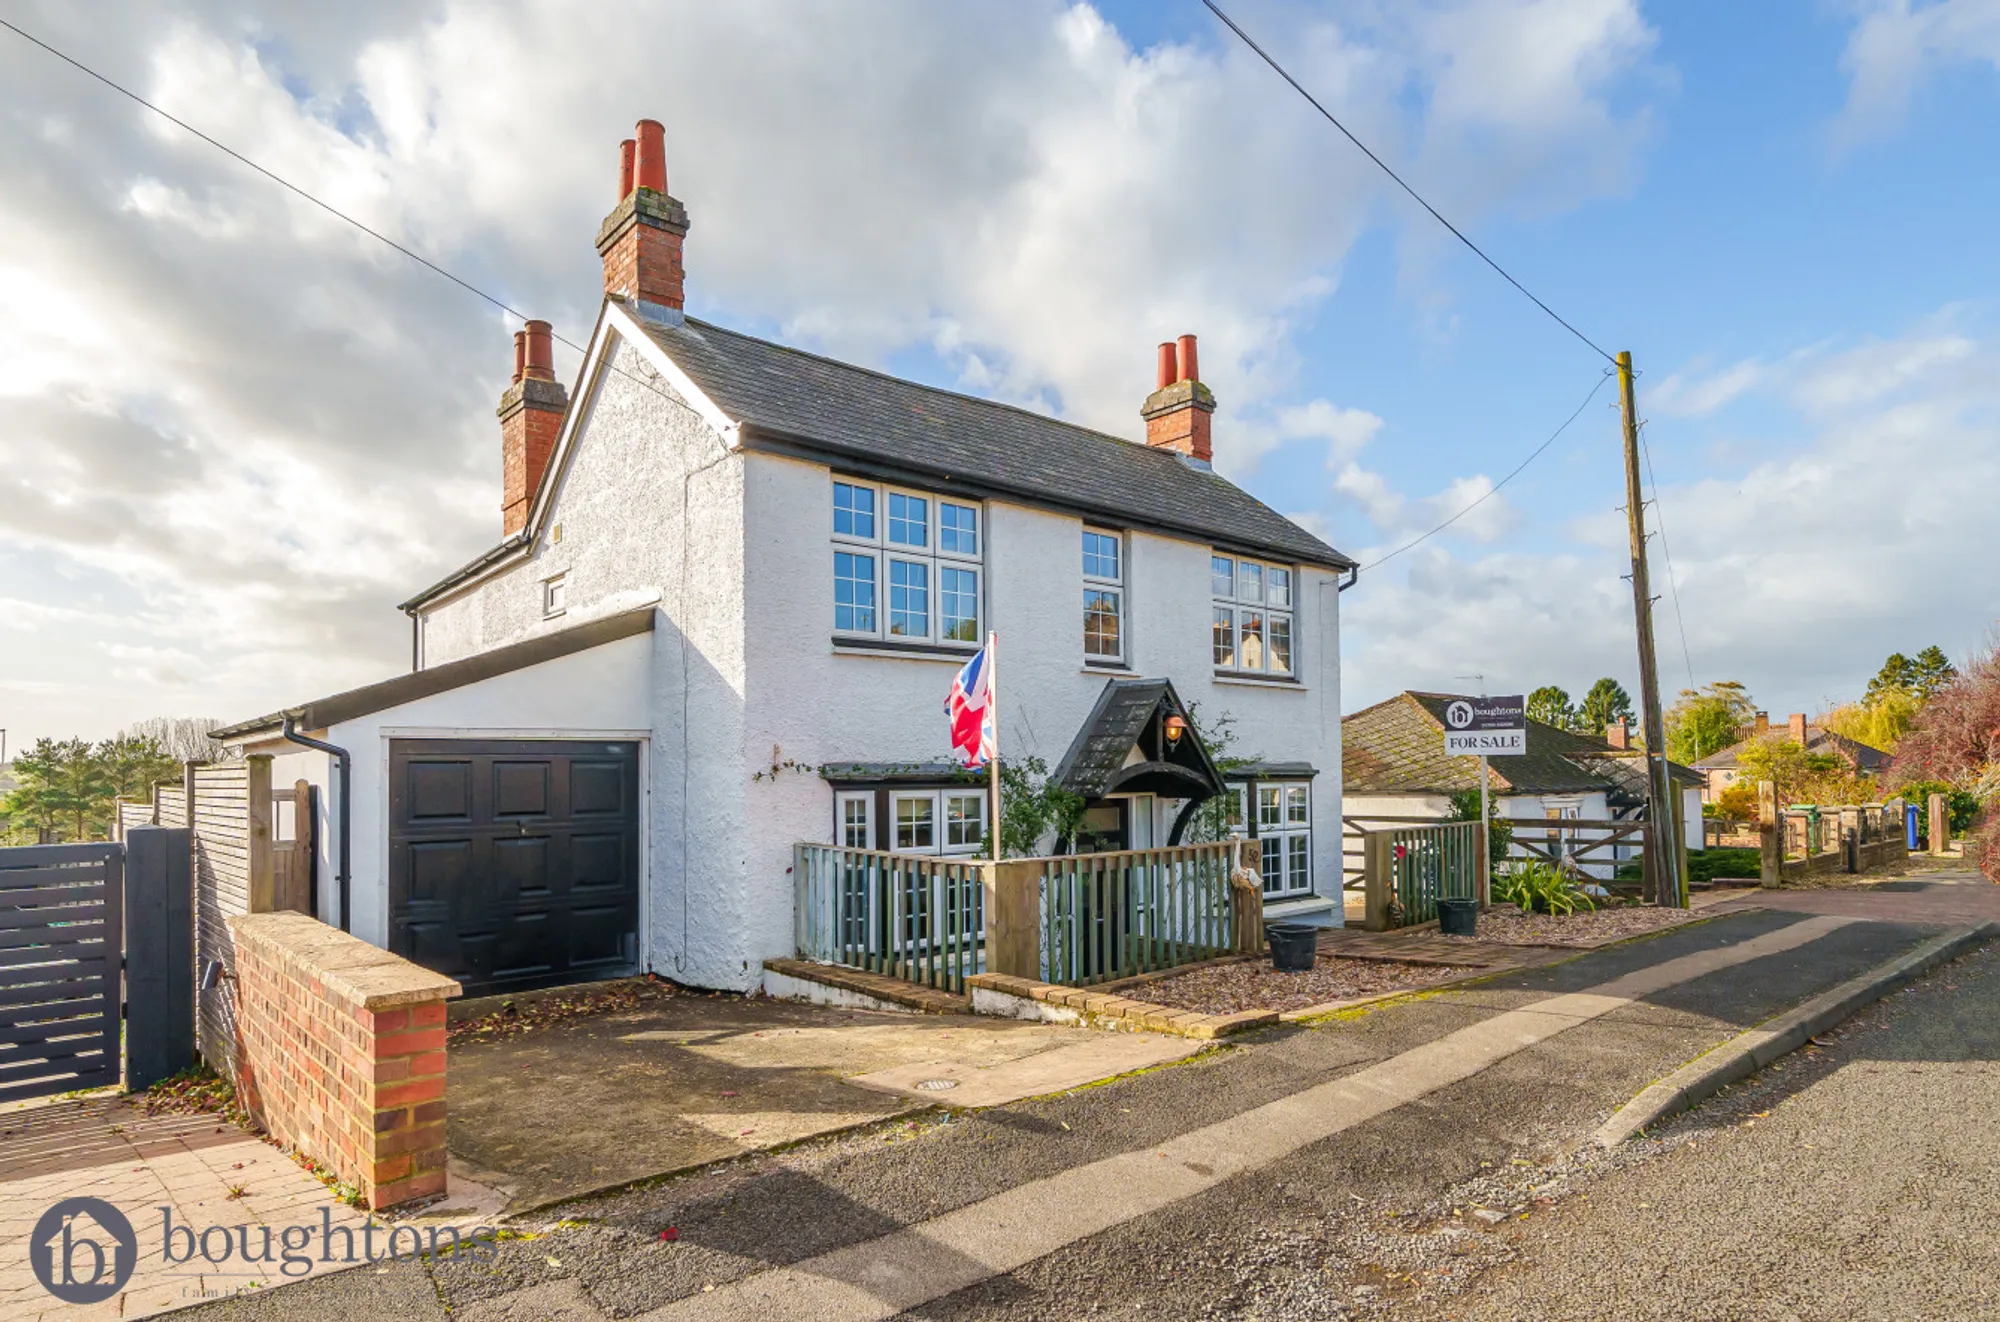 4 bed detached house for sale in Banbury Road, Brackley  - Property Image 3